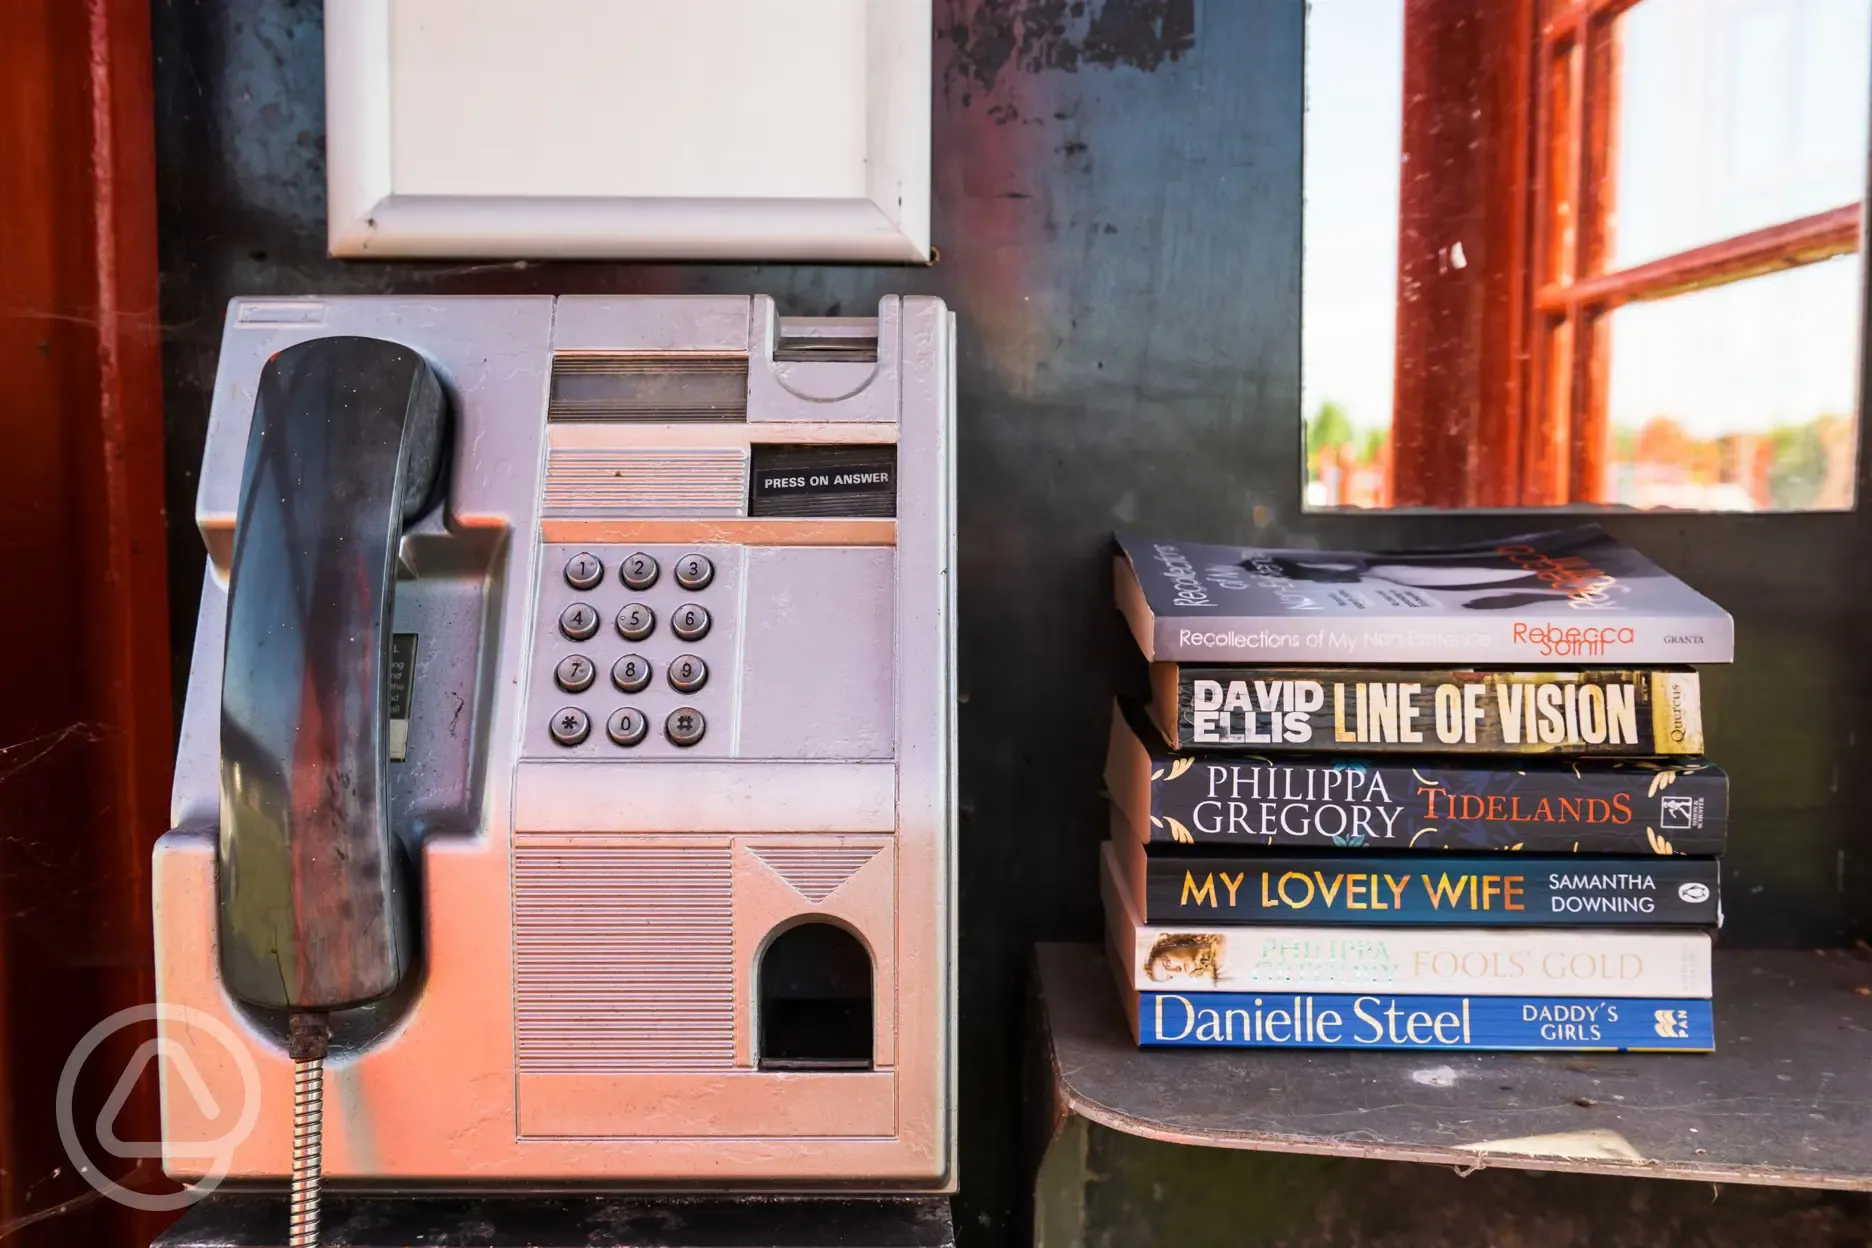 Book exchange in old telephone box